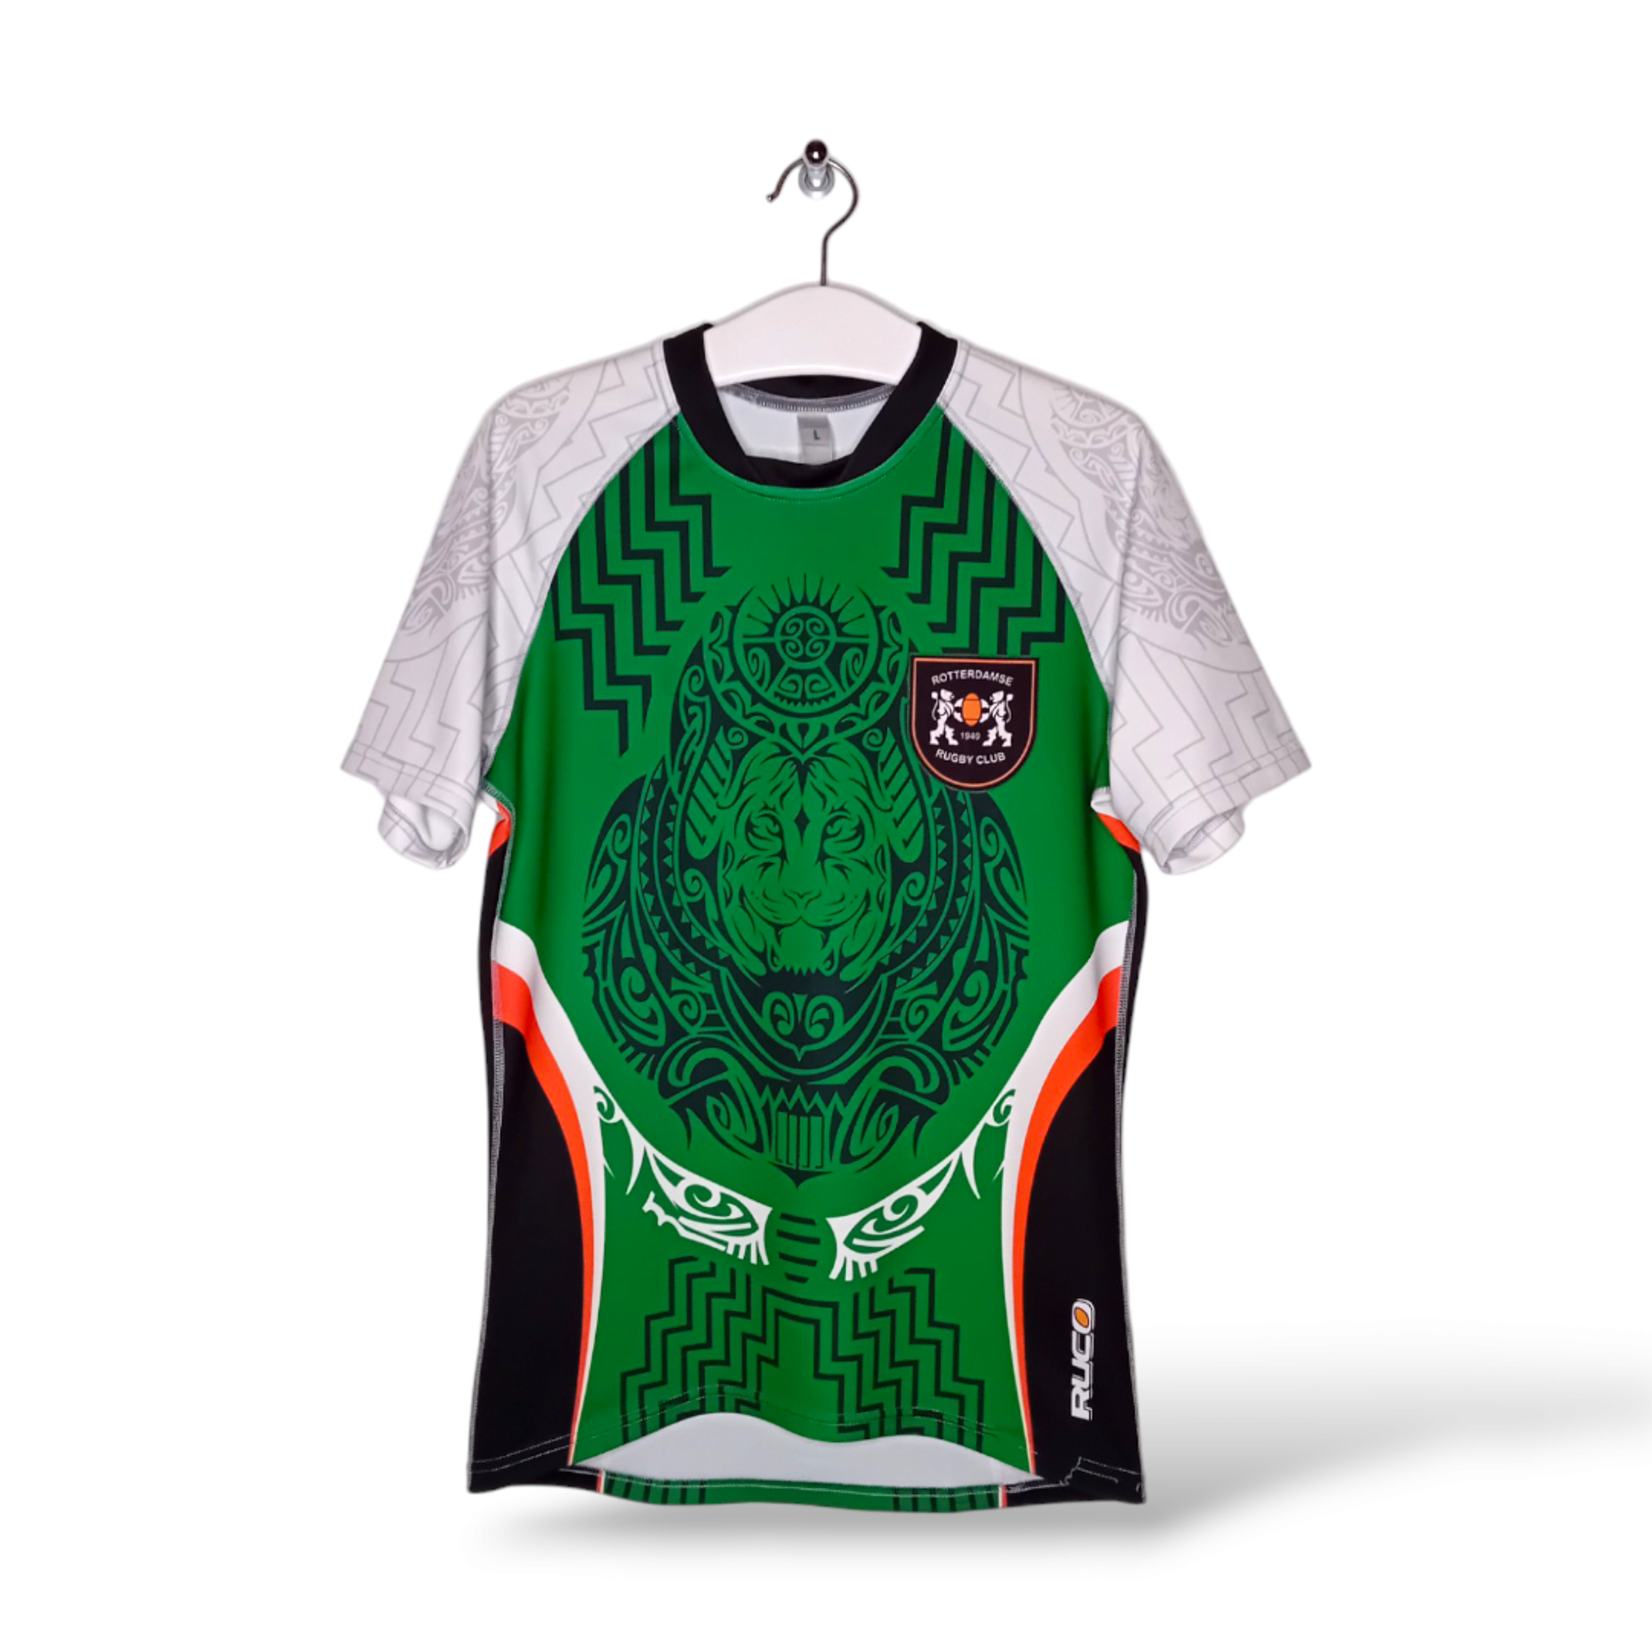 Ruco Origineel Ruco vintage rugby shirt Rotterdamse Rugby Club